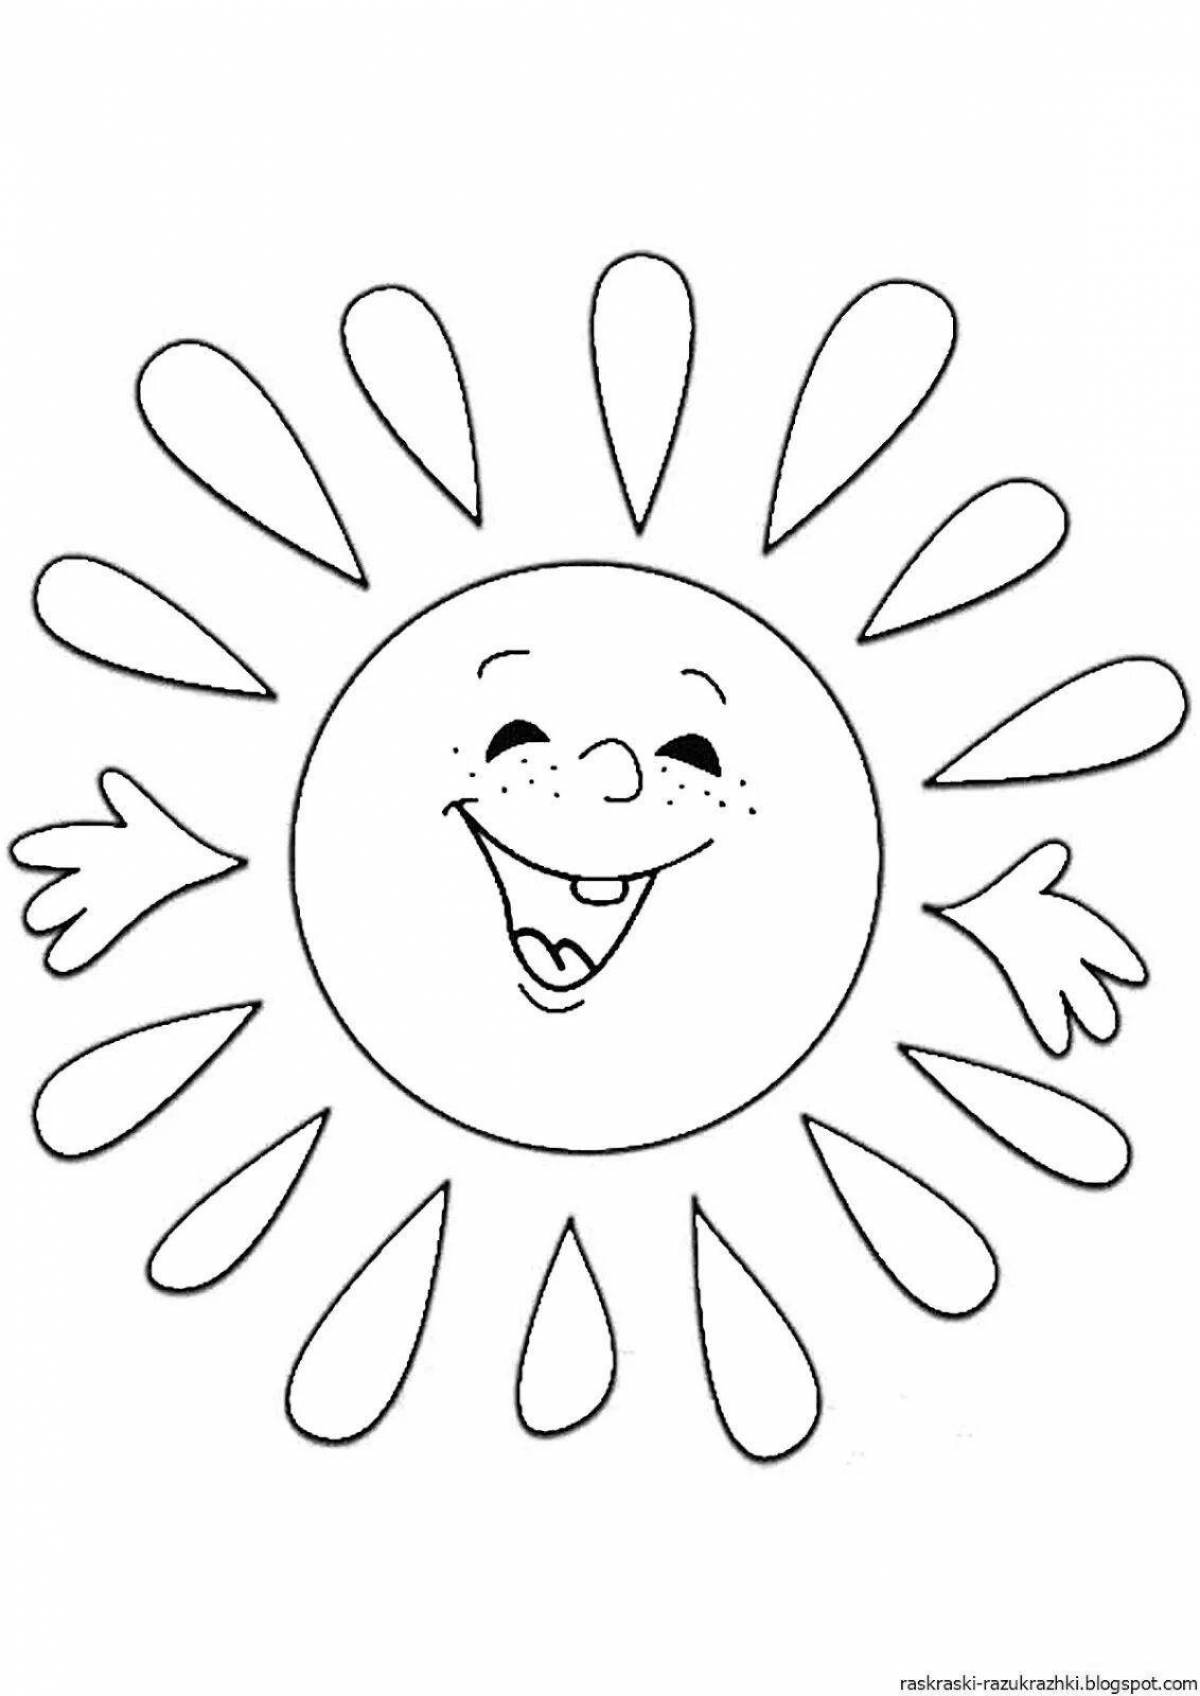 Bright coloring sun for children 2-3 years old